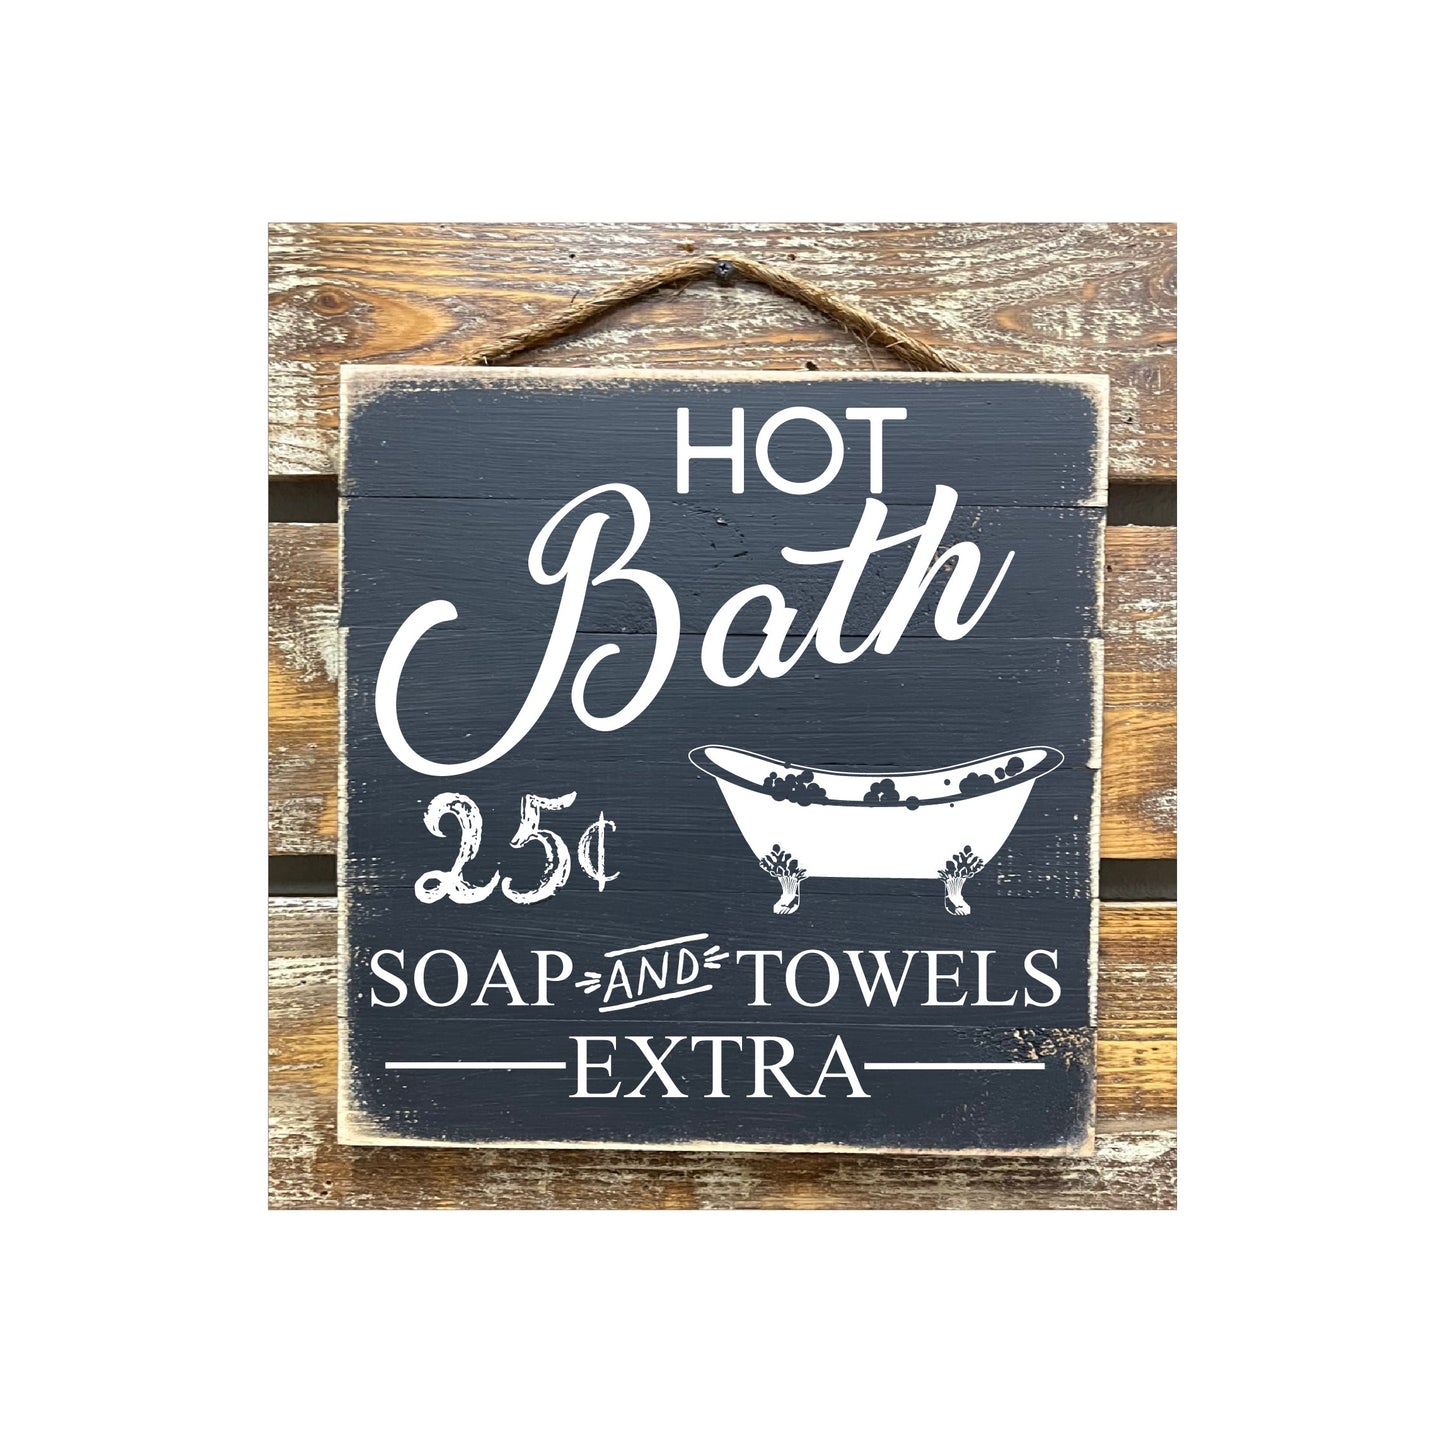 Hot Bath 25 Cents Soap And Towels Extra